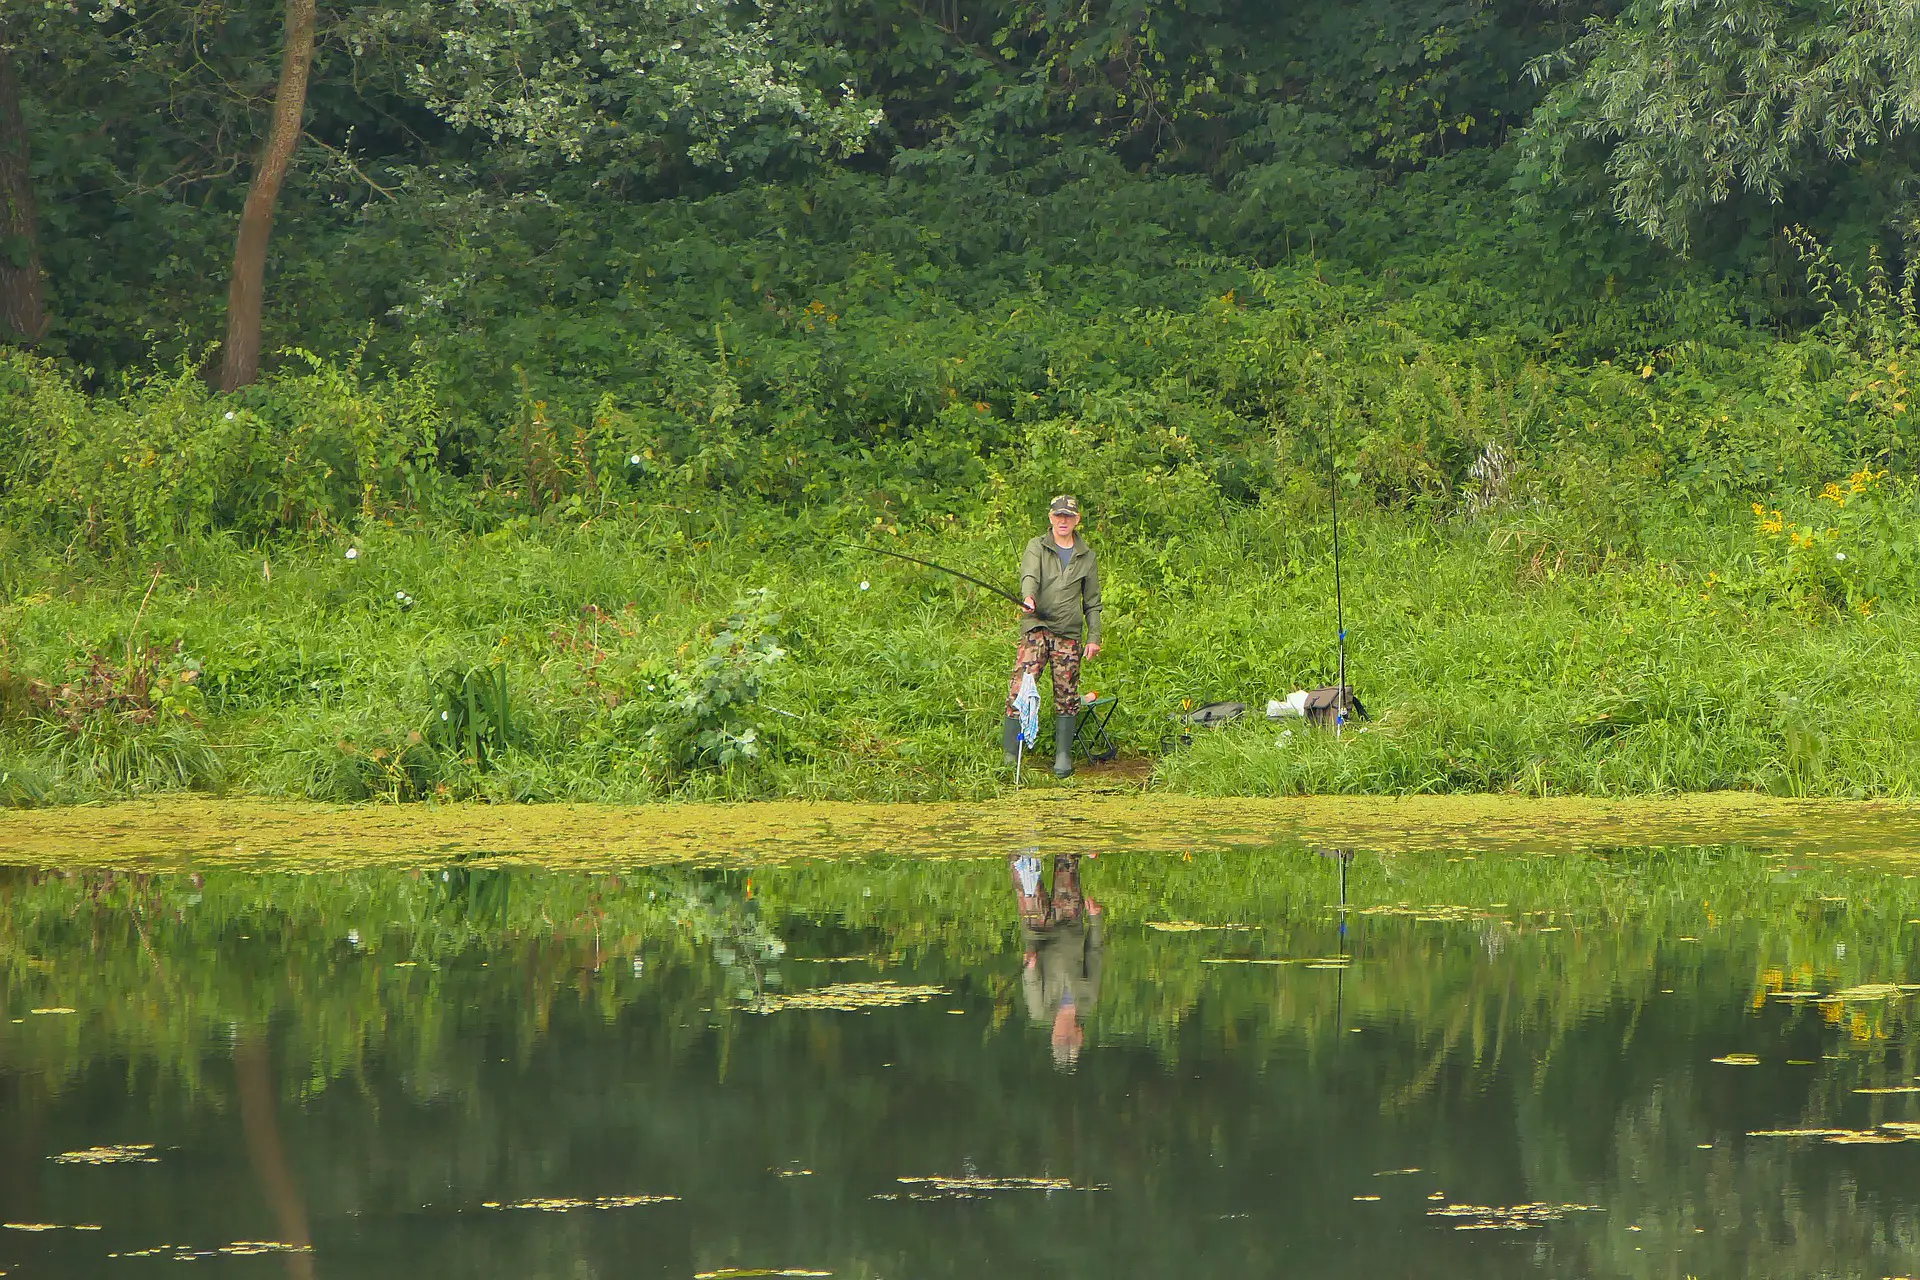 An angler fishing from the bank